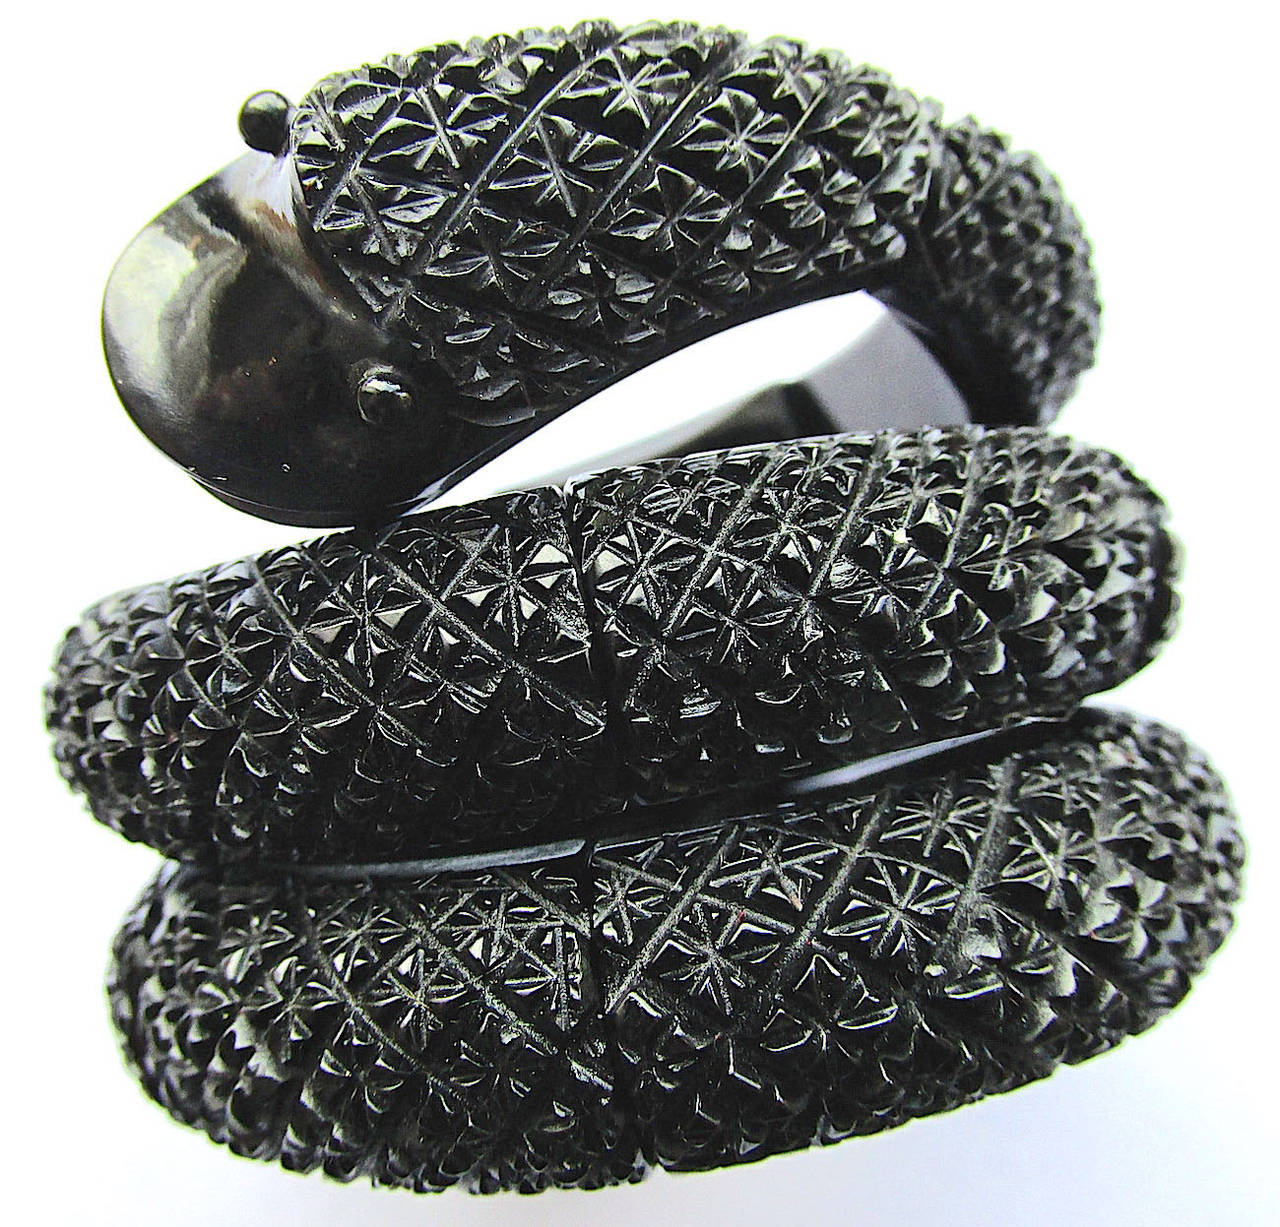 Fantastic Victorian Whitby jet coiled snake bracelet hand carved from the jet mined in Whitby England. Jet jewelry became popular after the death of Prince Albert when Victoria went into mourning and the only jewelry permitted at court was jet.